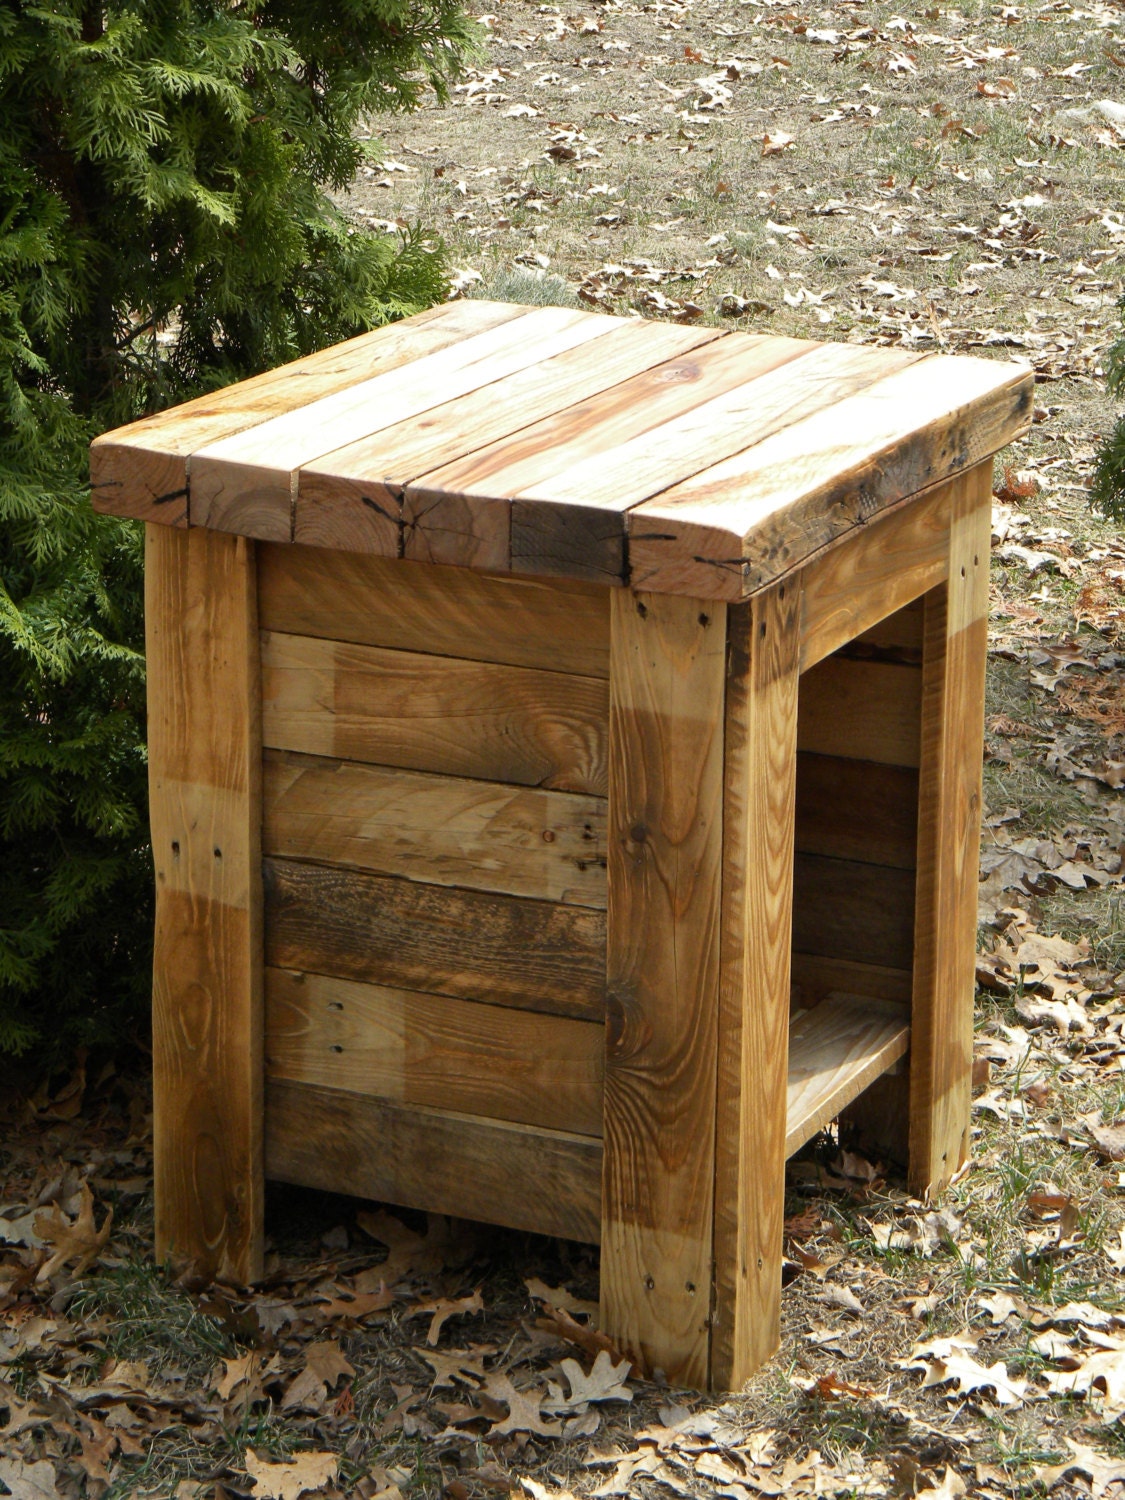 Reclaimed Barn Wood Furniture | at the galleria